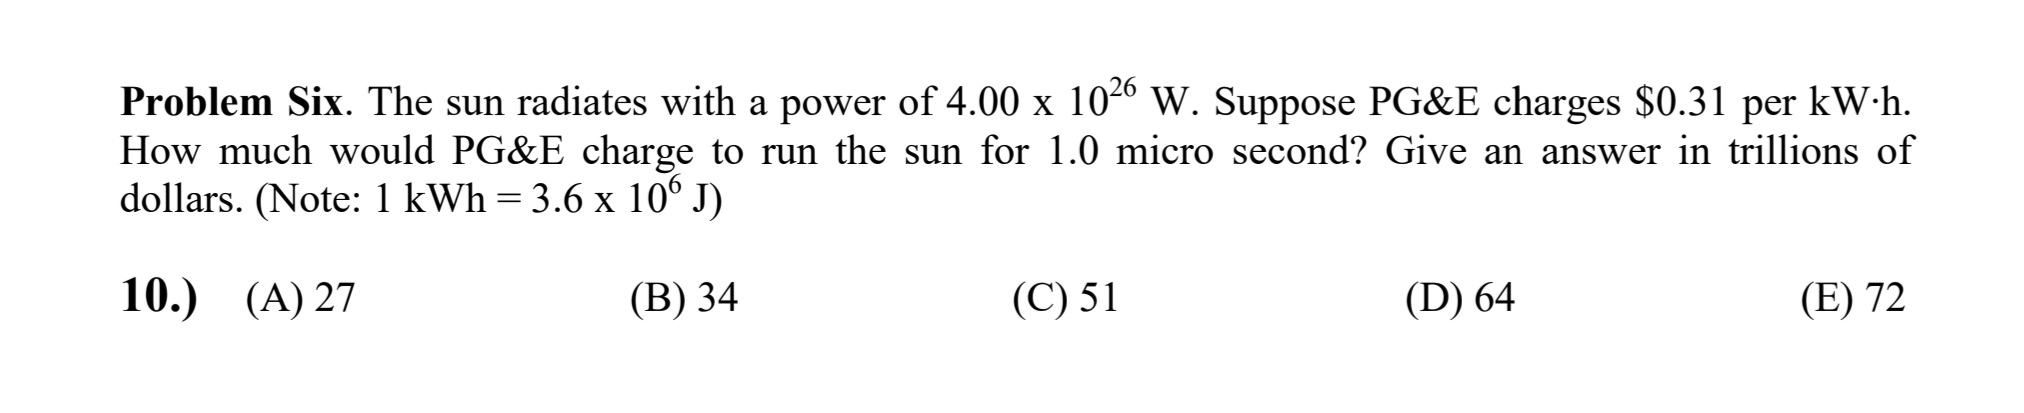 Problem Six. The sun radiates with a power of 4.00 x 104º W. Suppose PG&E charges $0.31 per kW h.
How much would PG&E charge to run the sun for 1.0 micro second? Give an answer in trillions of
dollars. (Note: 1 kWh = 3.6 x 10° J)
10.) (A) 27
(В) 34
(С) 51
(D) 64
(E) 72
